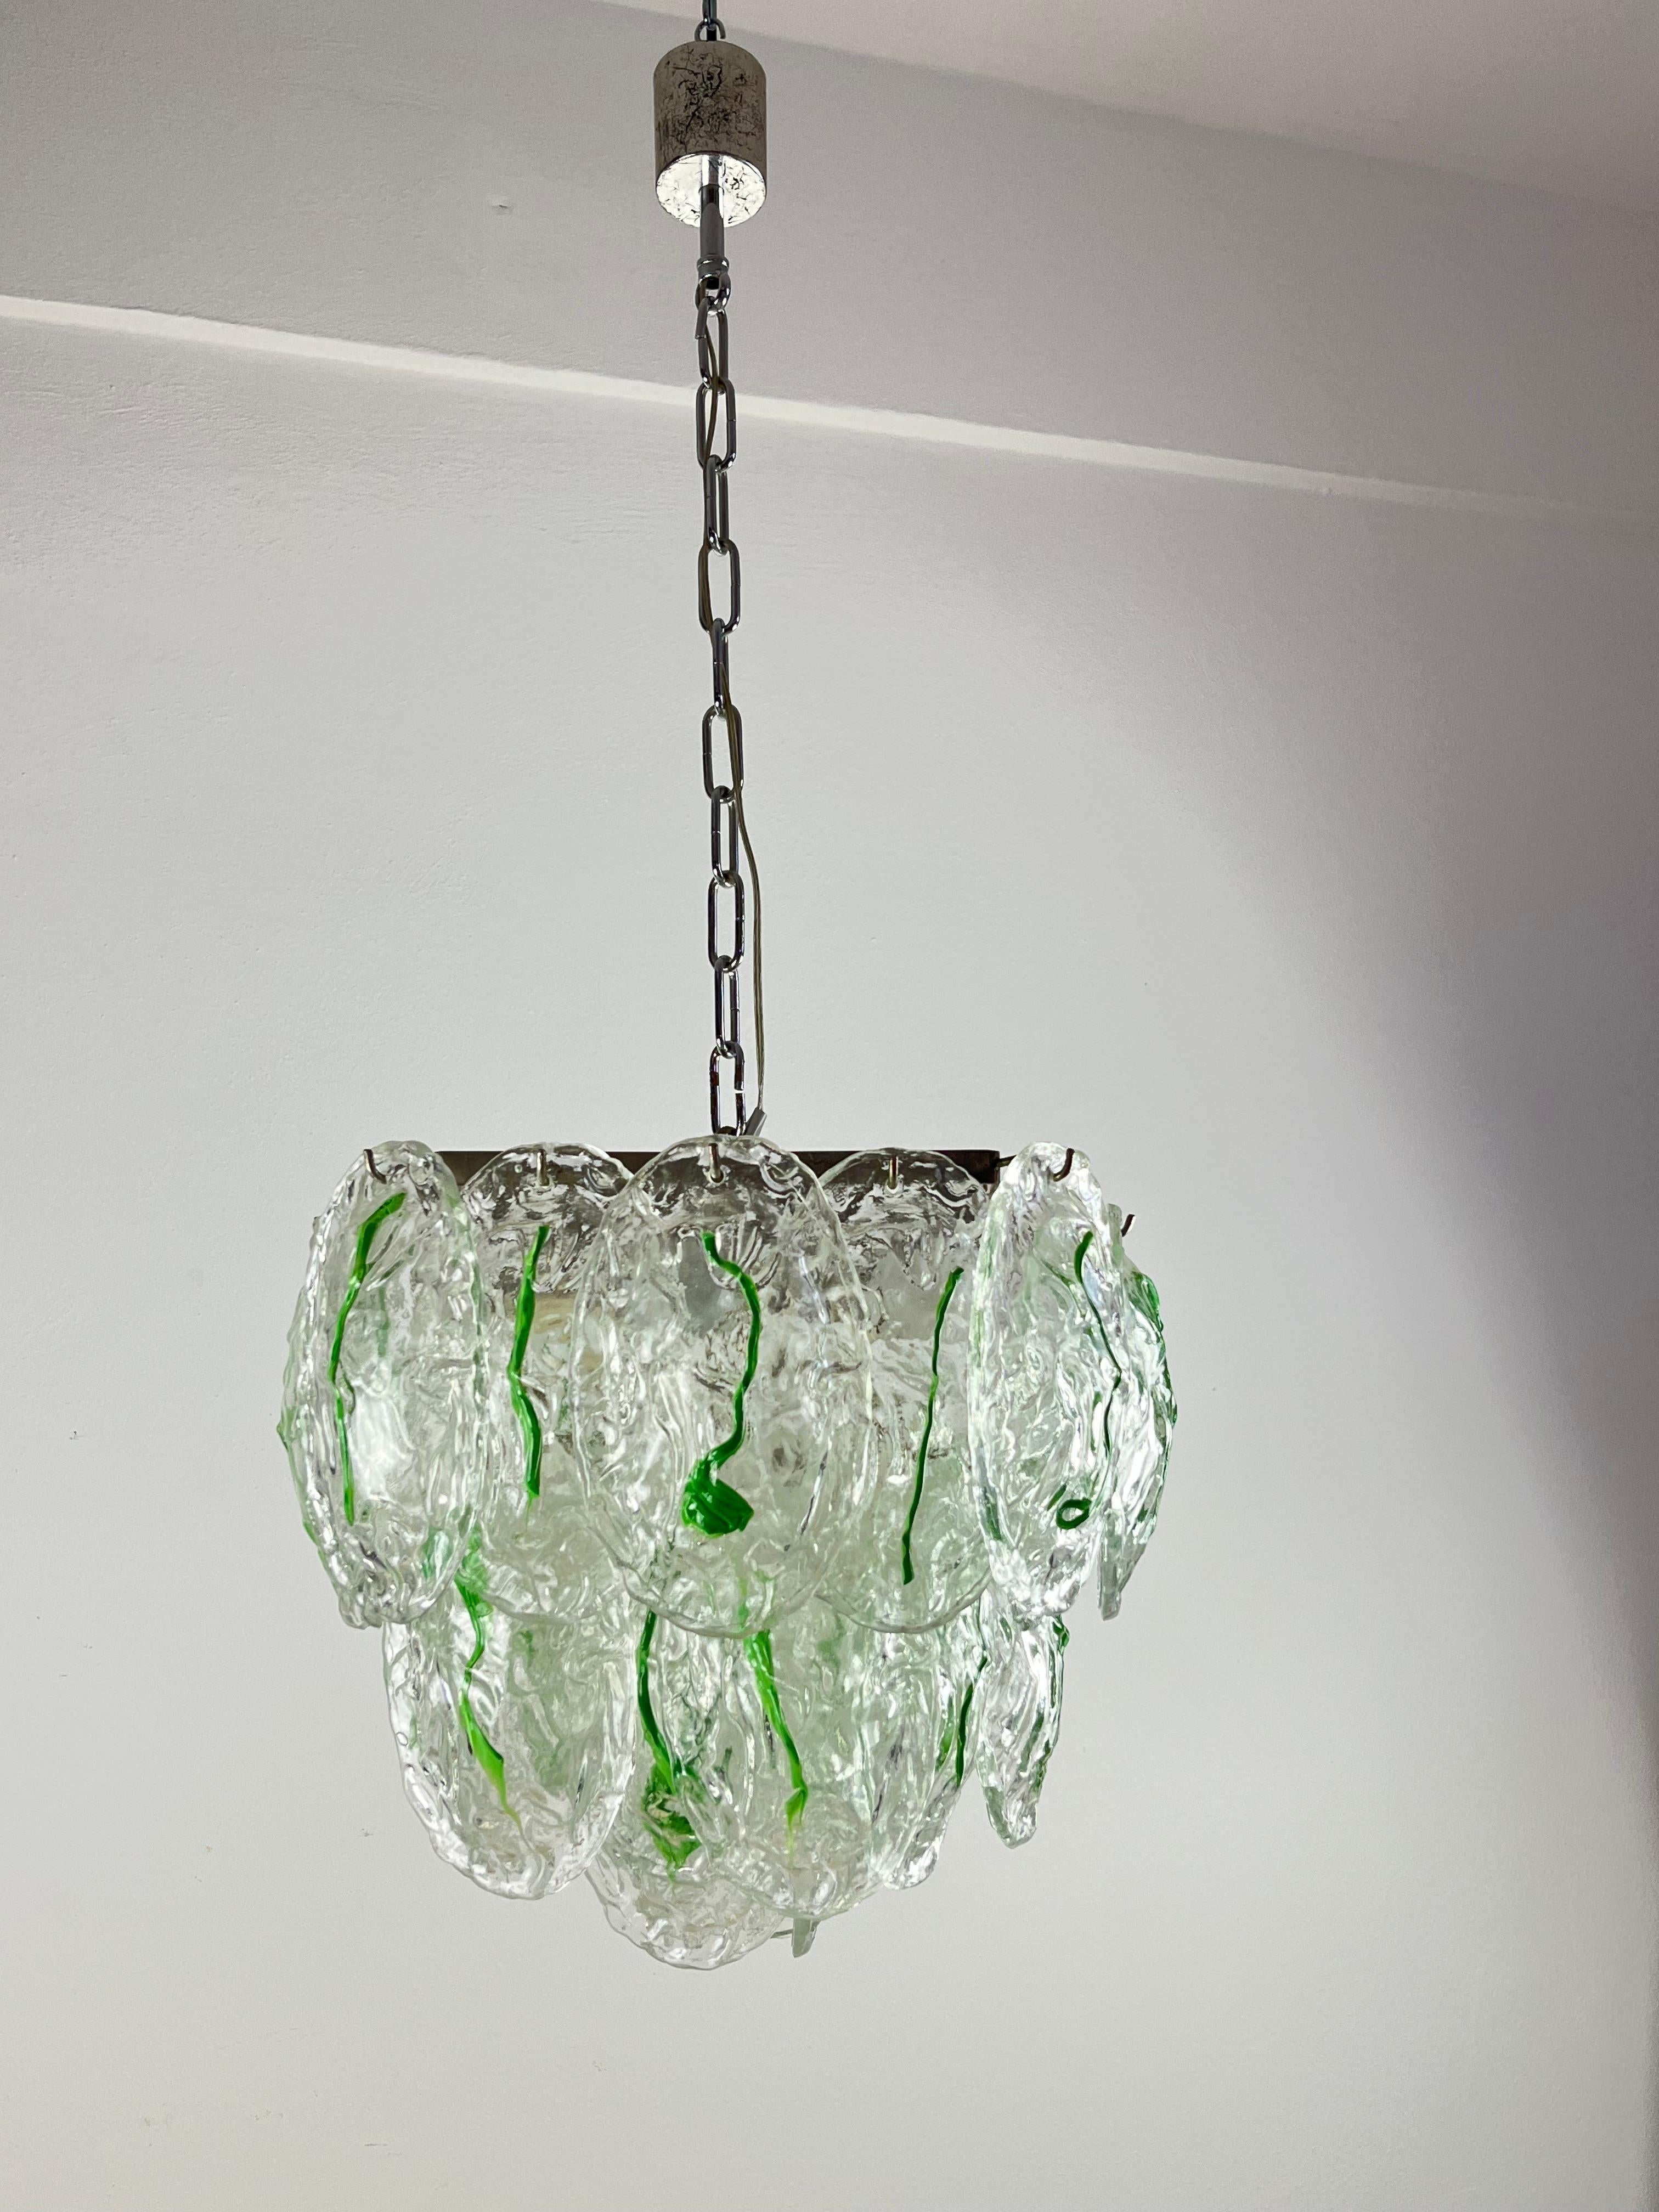 Other Six-light Murano Glass Chandelier by Vistosi, Italy, 1960s For Sale